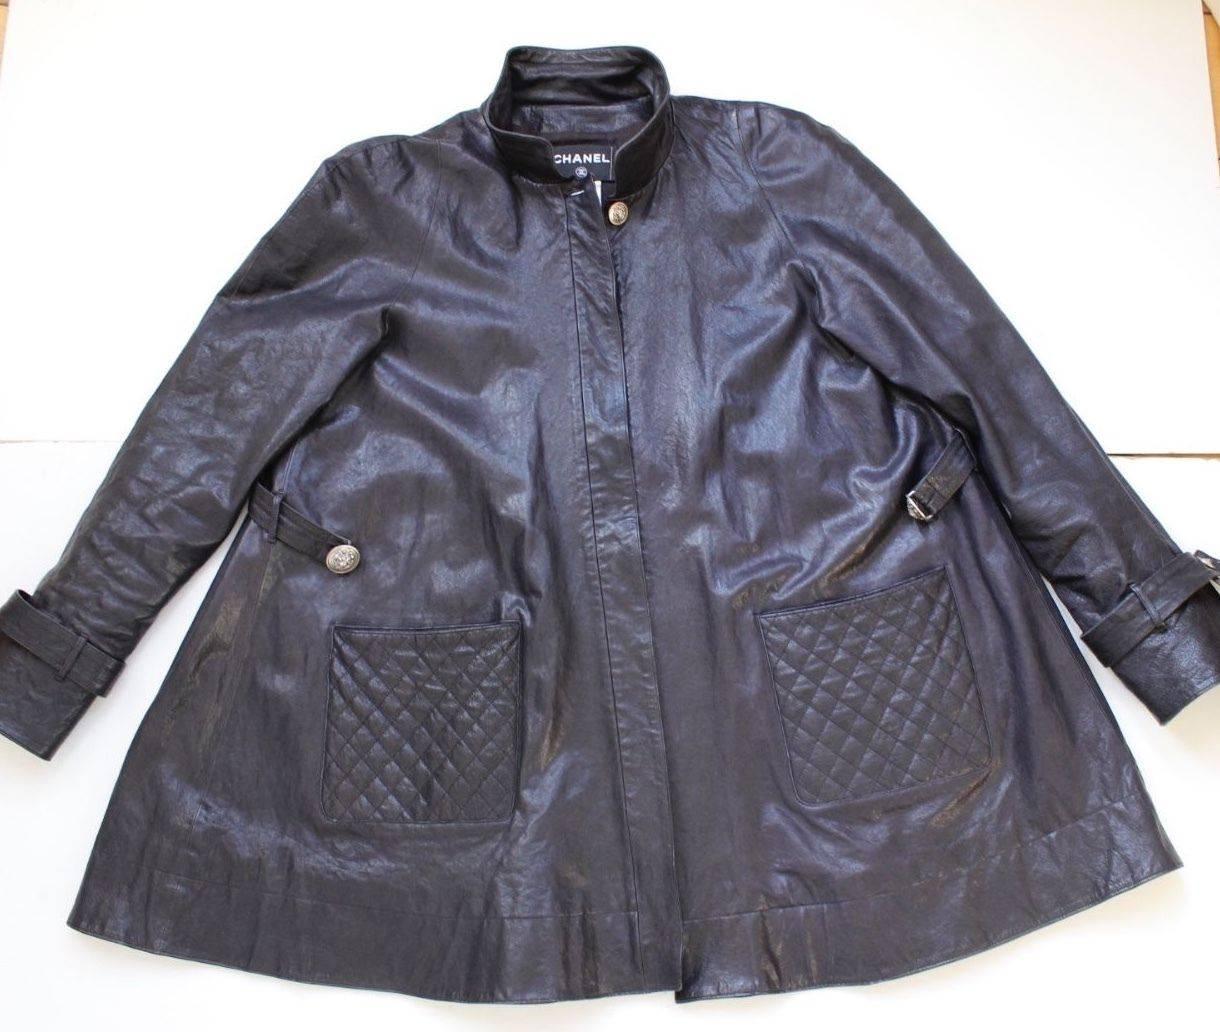 Chanel Black Quilted Leather Swing Coat Jacket 42 uk 14 4